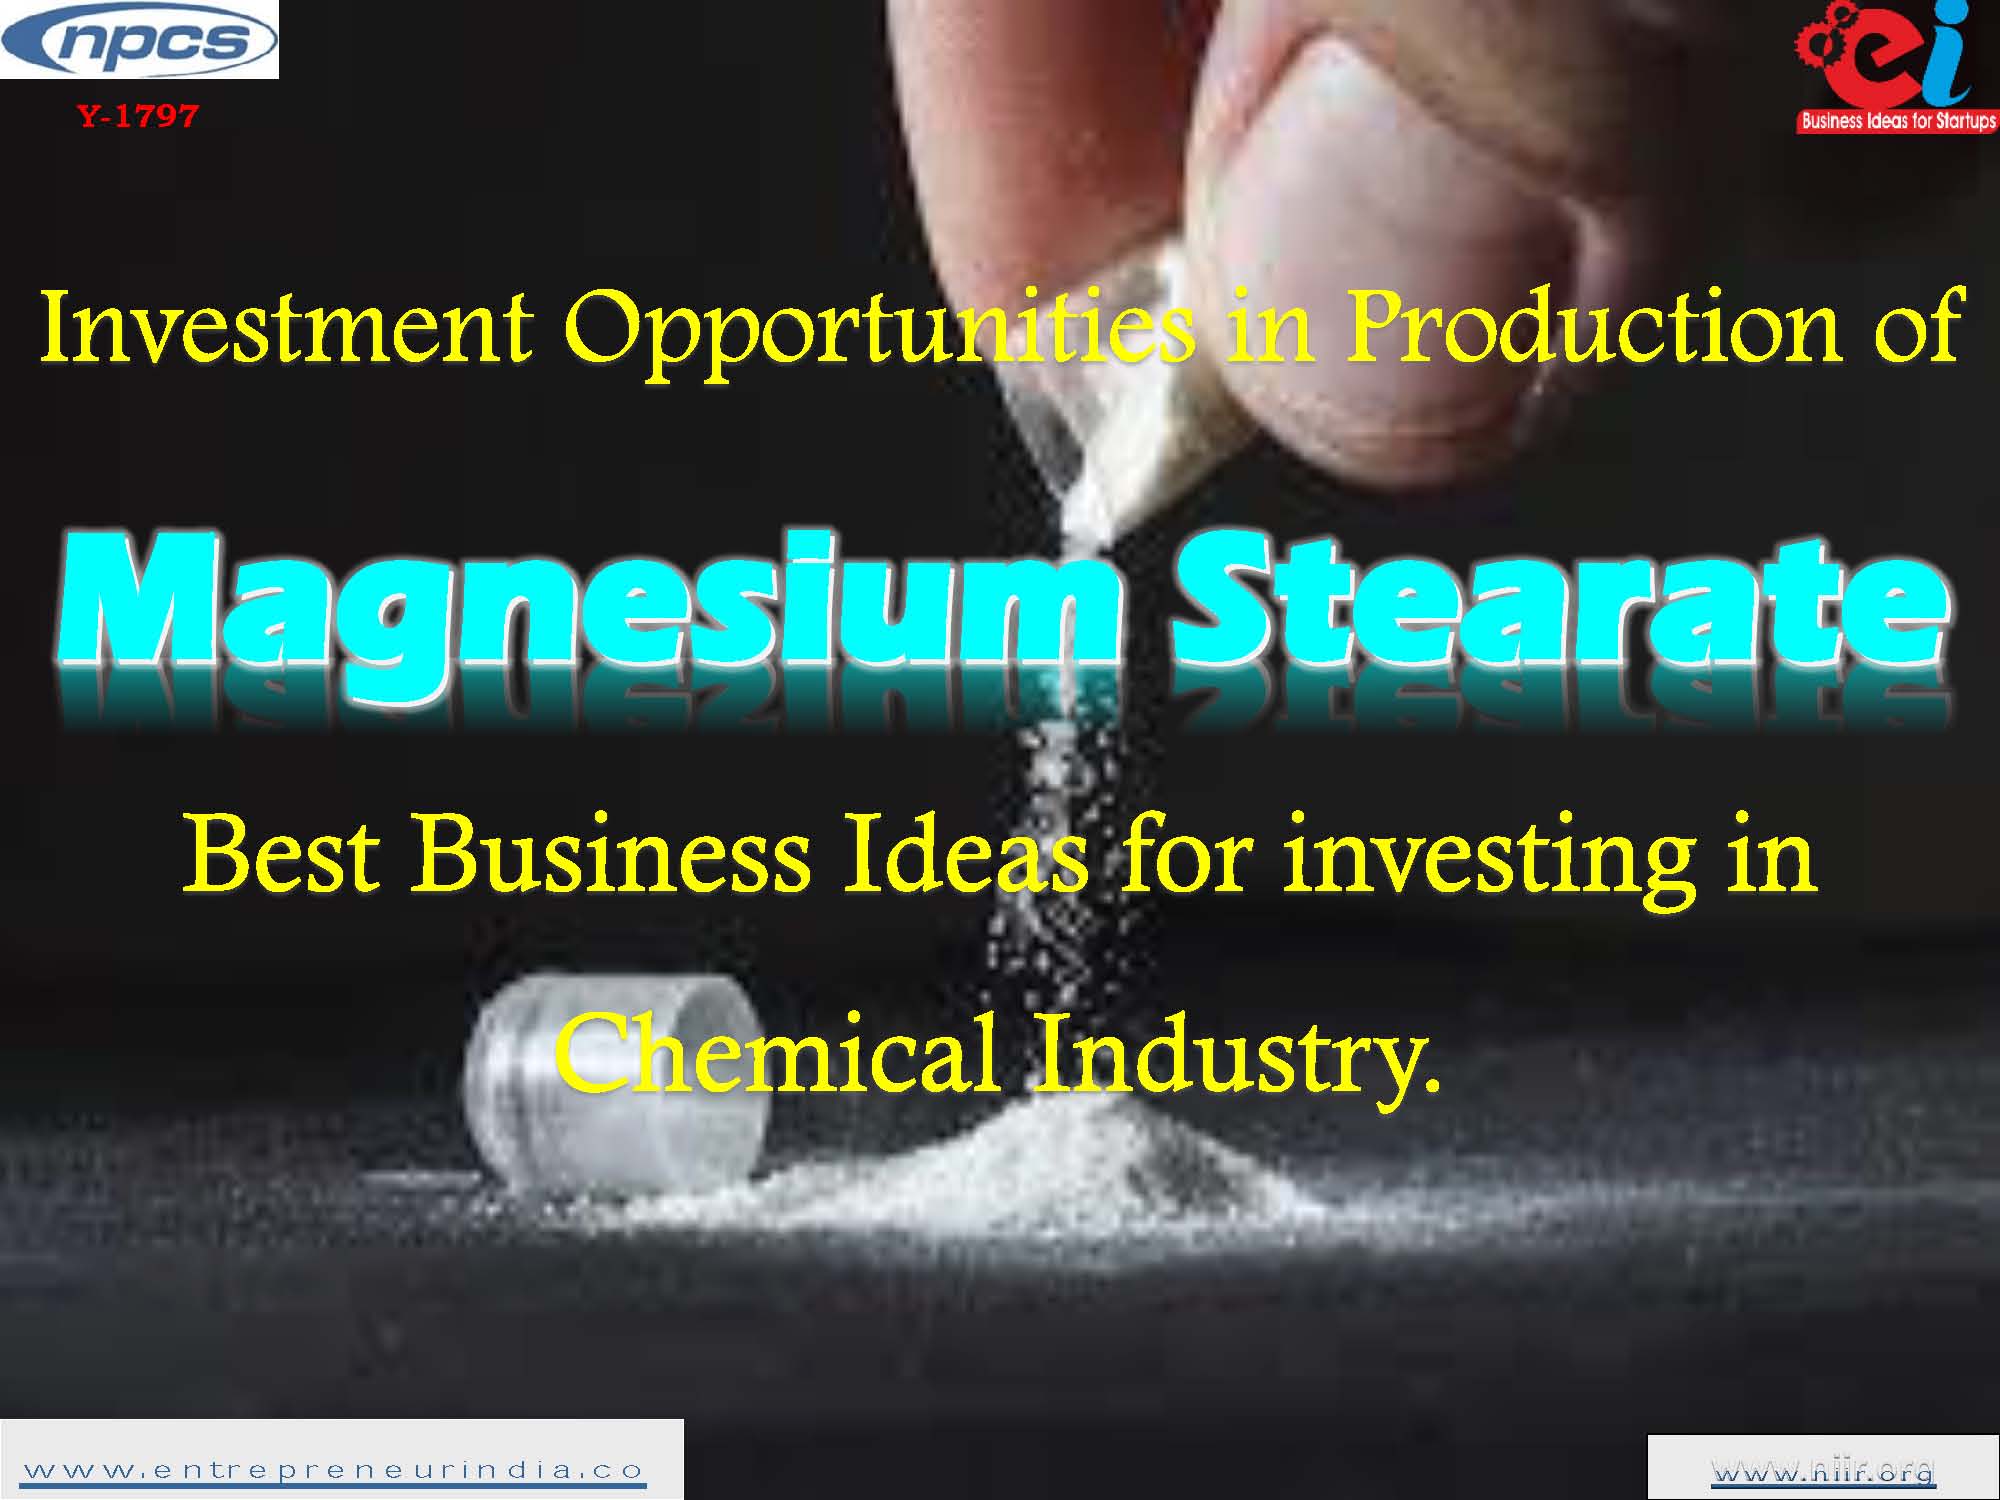 Investment Opportunities in Production of Magnesium Stearate Best Business Ideas for investing in Chemical Industry